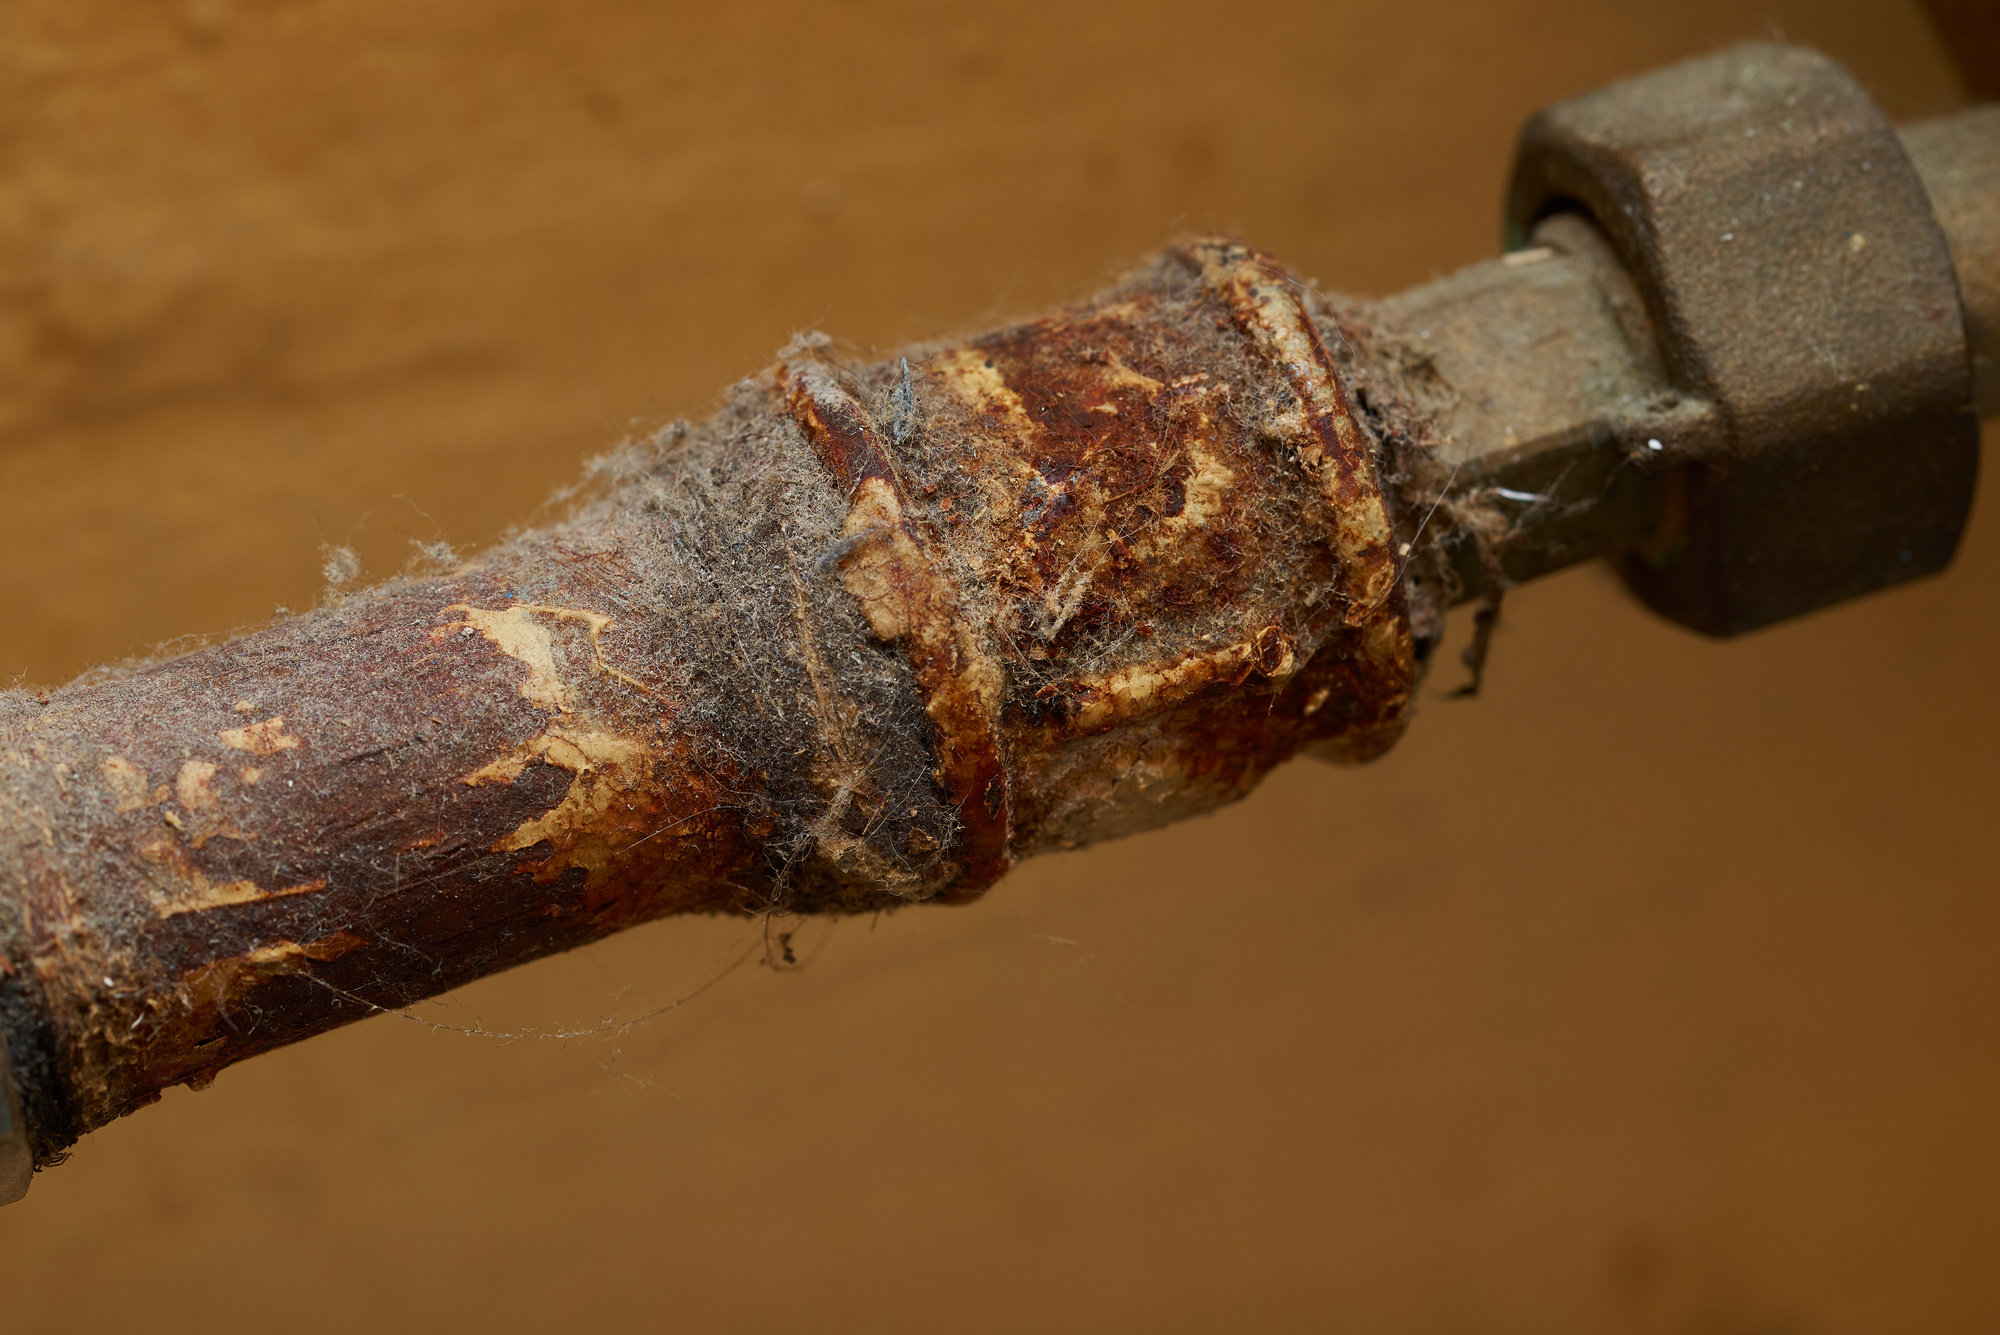 Do you have rusty pipes in your home? If so, it's beneficial to learn about the common causes and solutions. Click here for details.